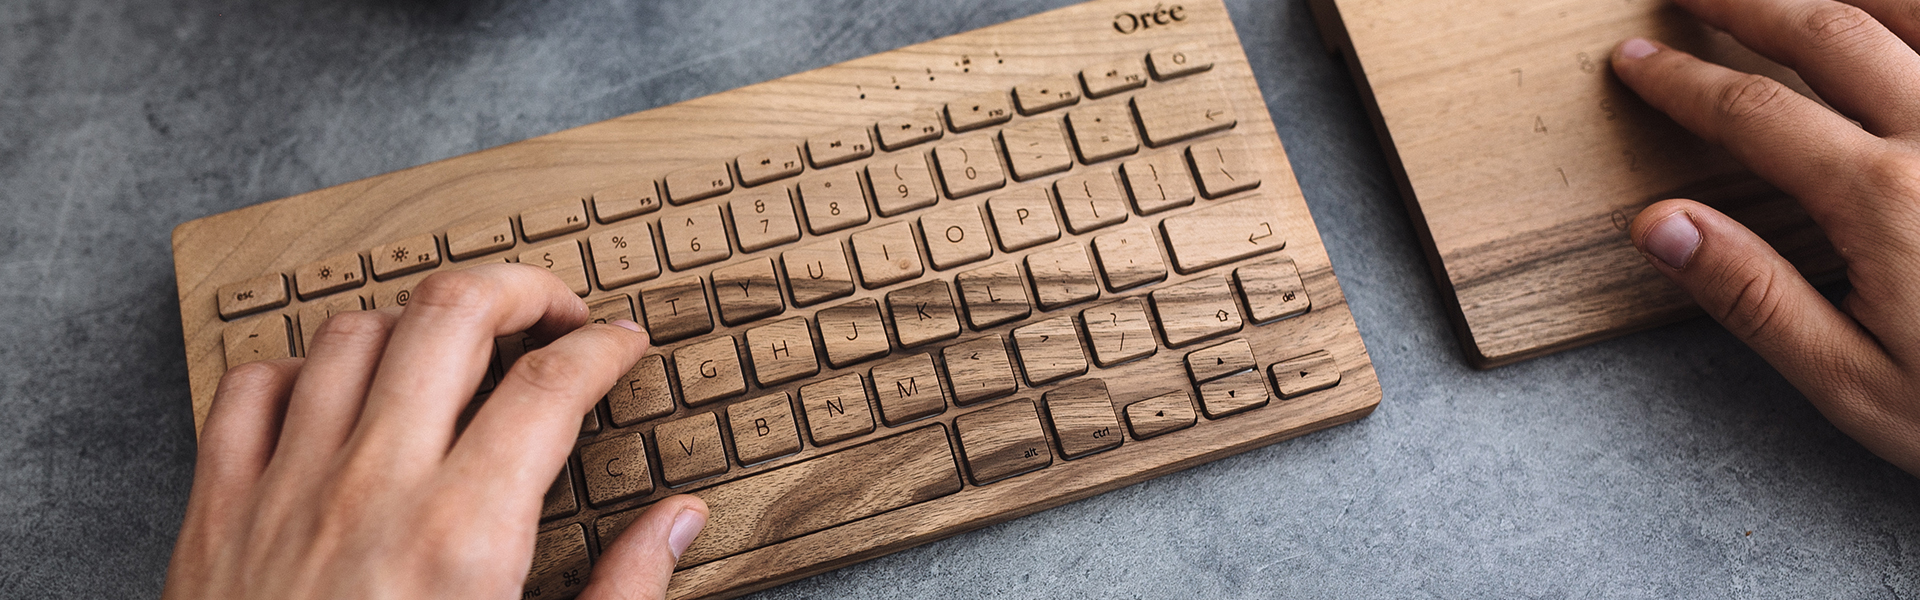 wooden keyboard hand crafted